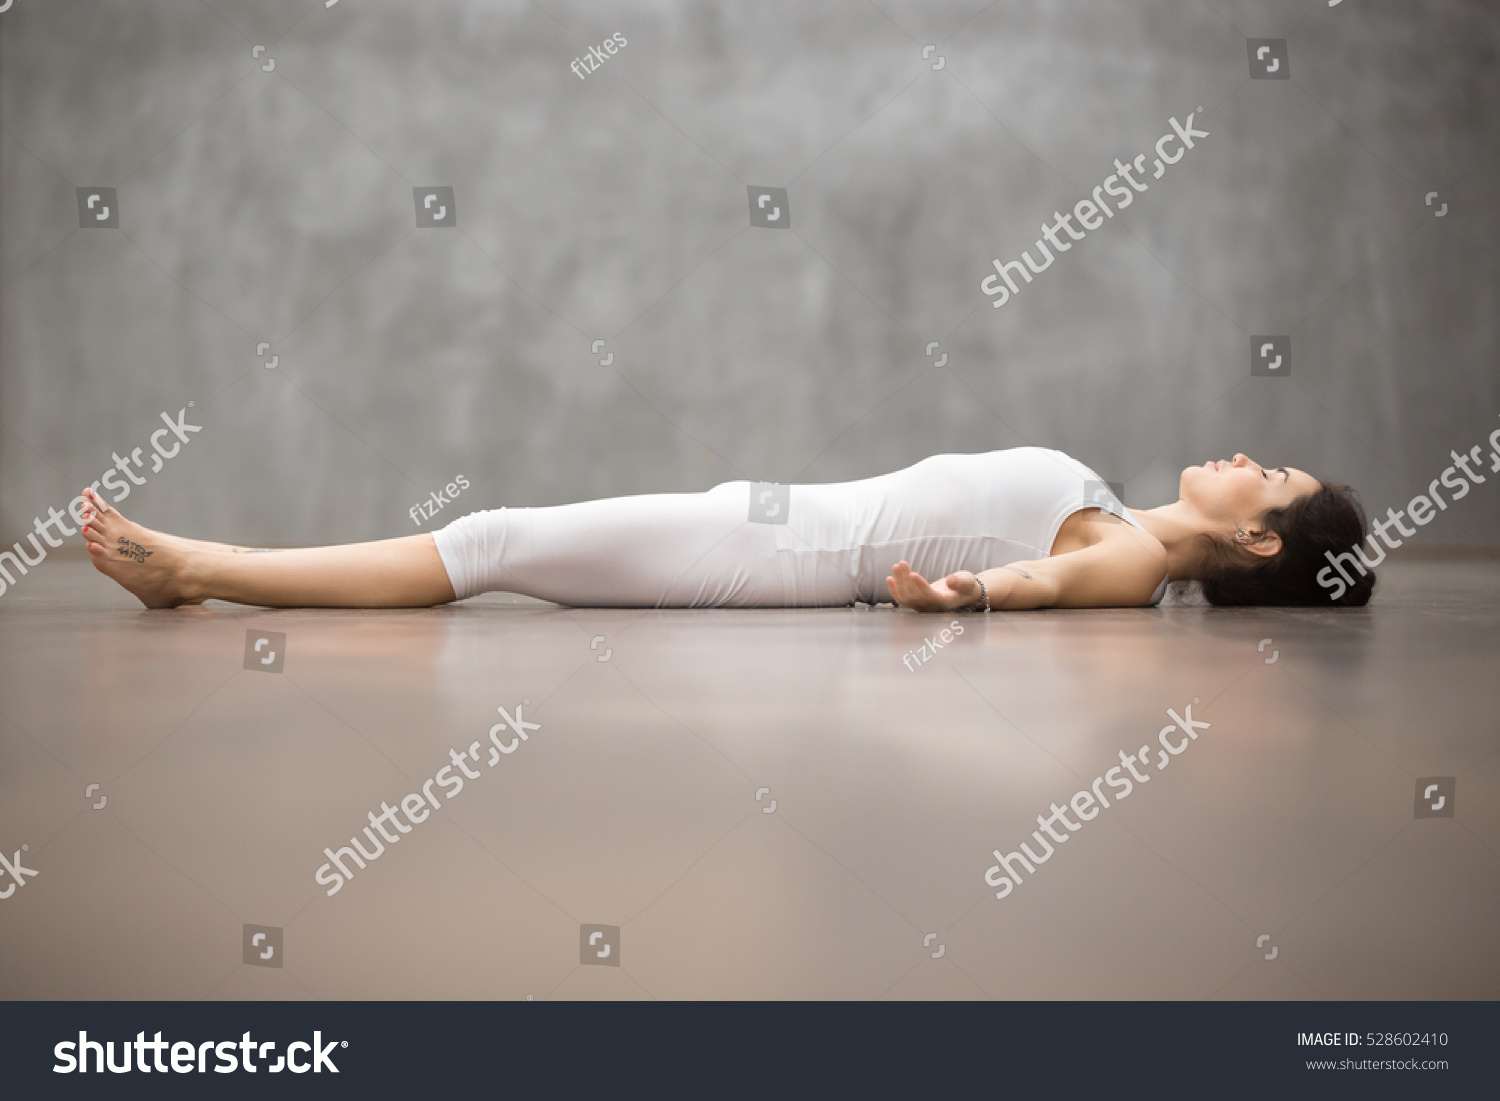 Side view portrait of beautiful young woman working out against grey wall, resting after doing yoga exercises, lying in Savasana (Corpse or Dead Body Posture), relaxing. Full length #528602410